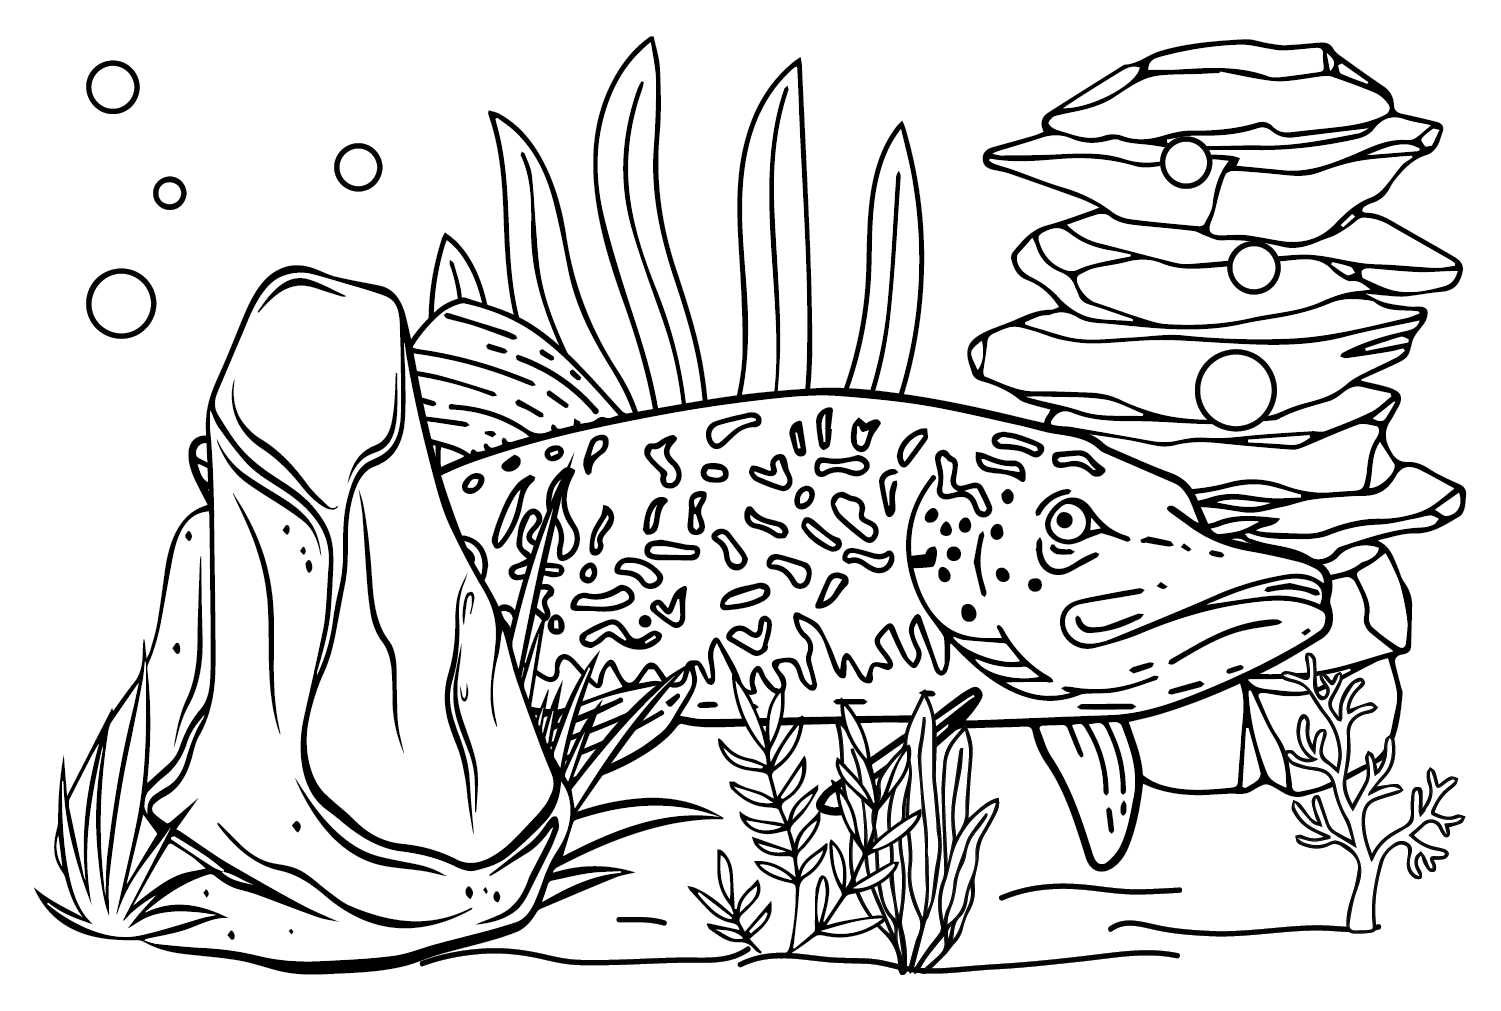 Northern Pike Print Coloring Page - Free Printable Coloring Pages